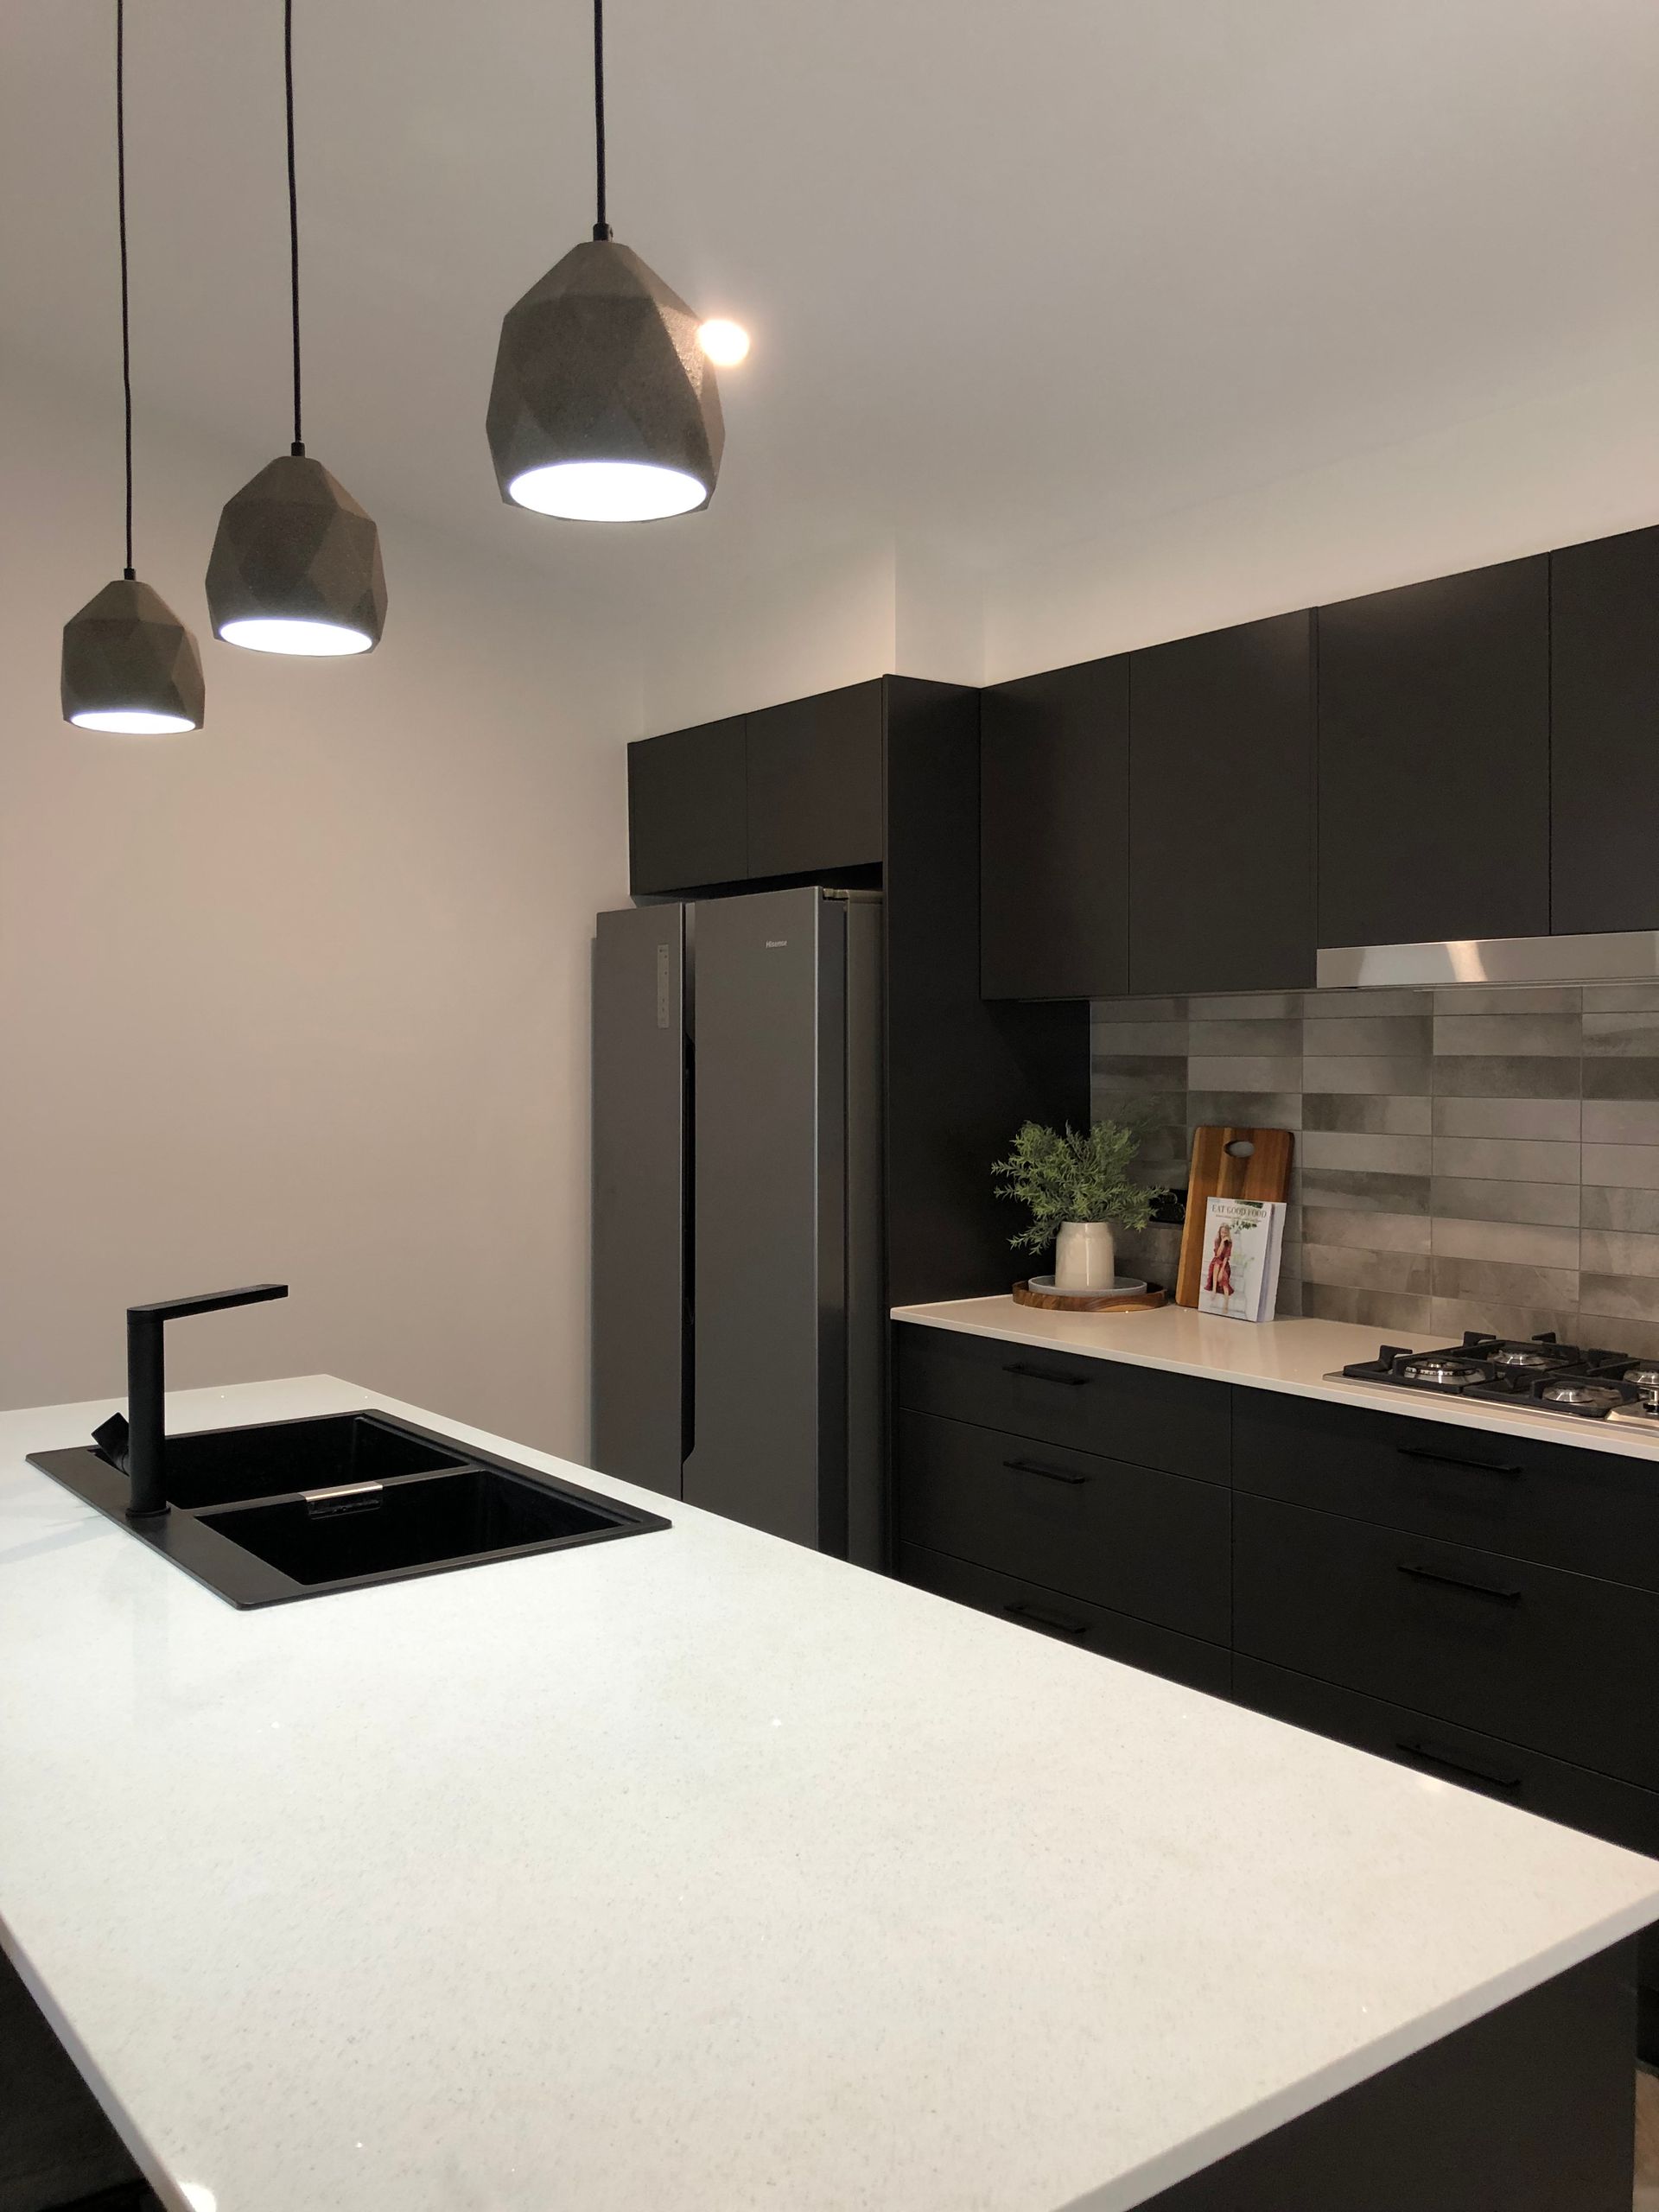 Kitchen Interior With Black Sink and Cabinets — Kitchen Renovations in Dubbo, QLD